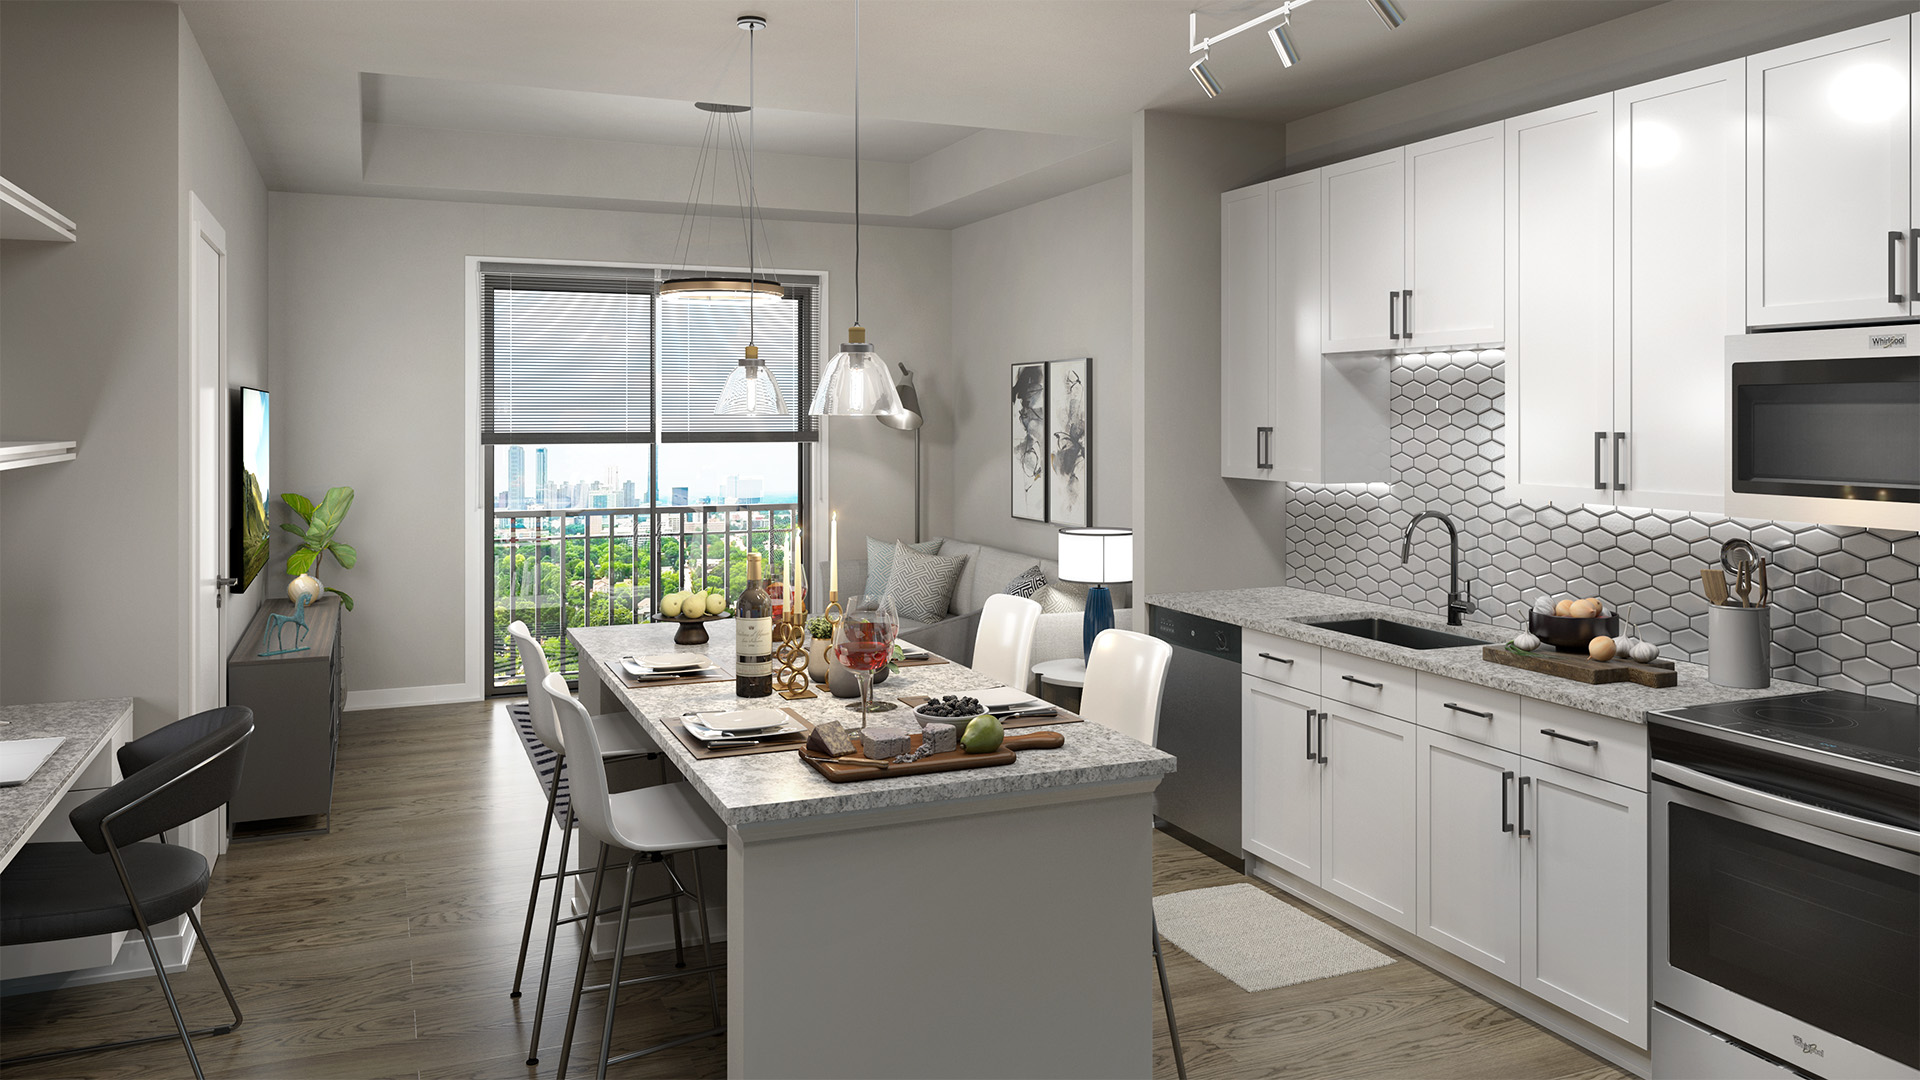 The Heights at Millcroft - Floorplan - Carriage Home - 1A-1